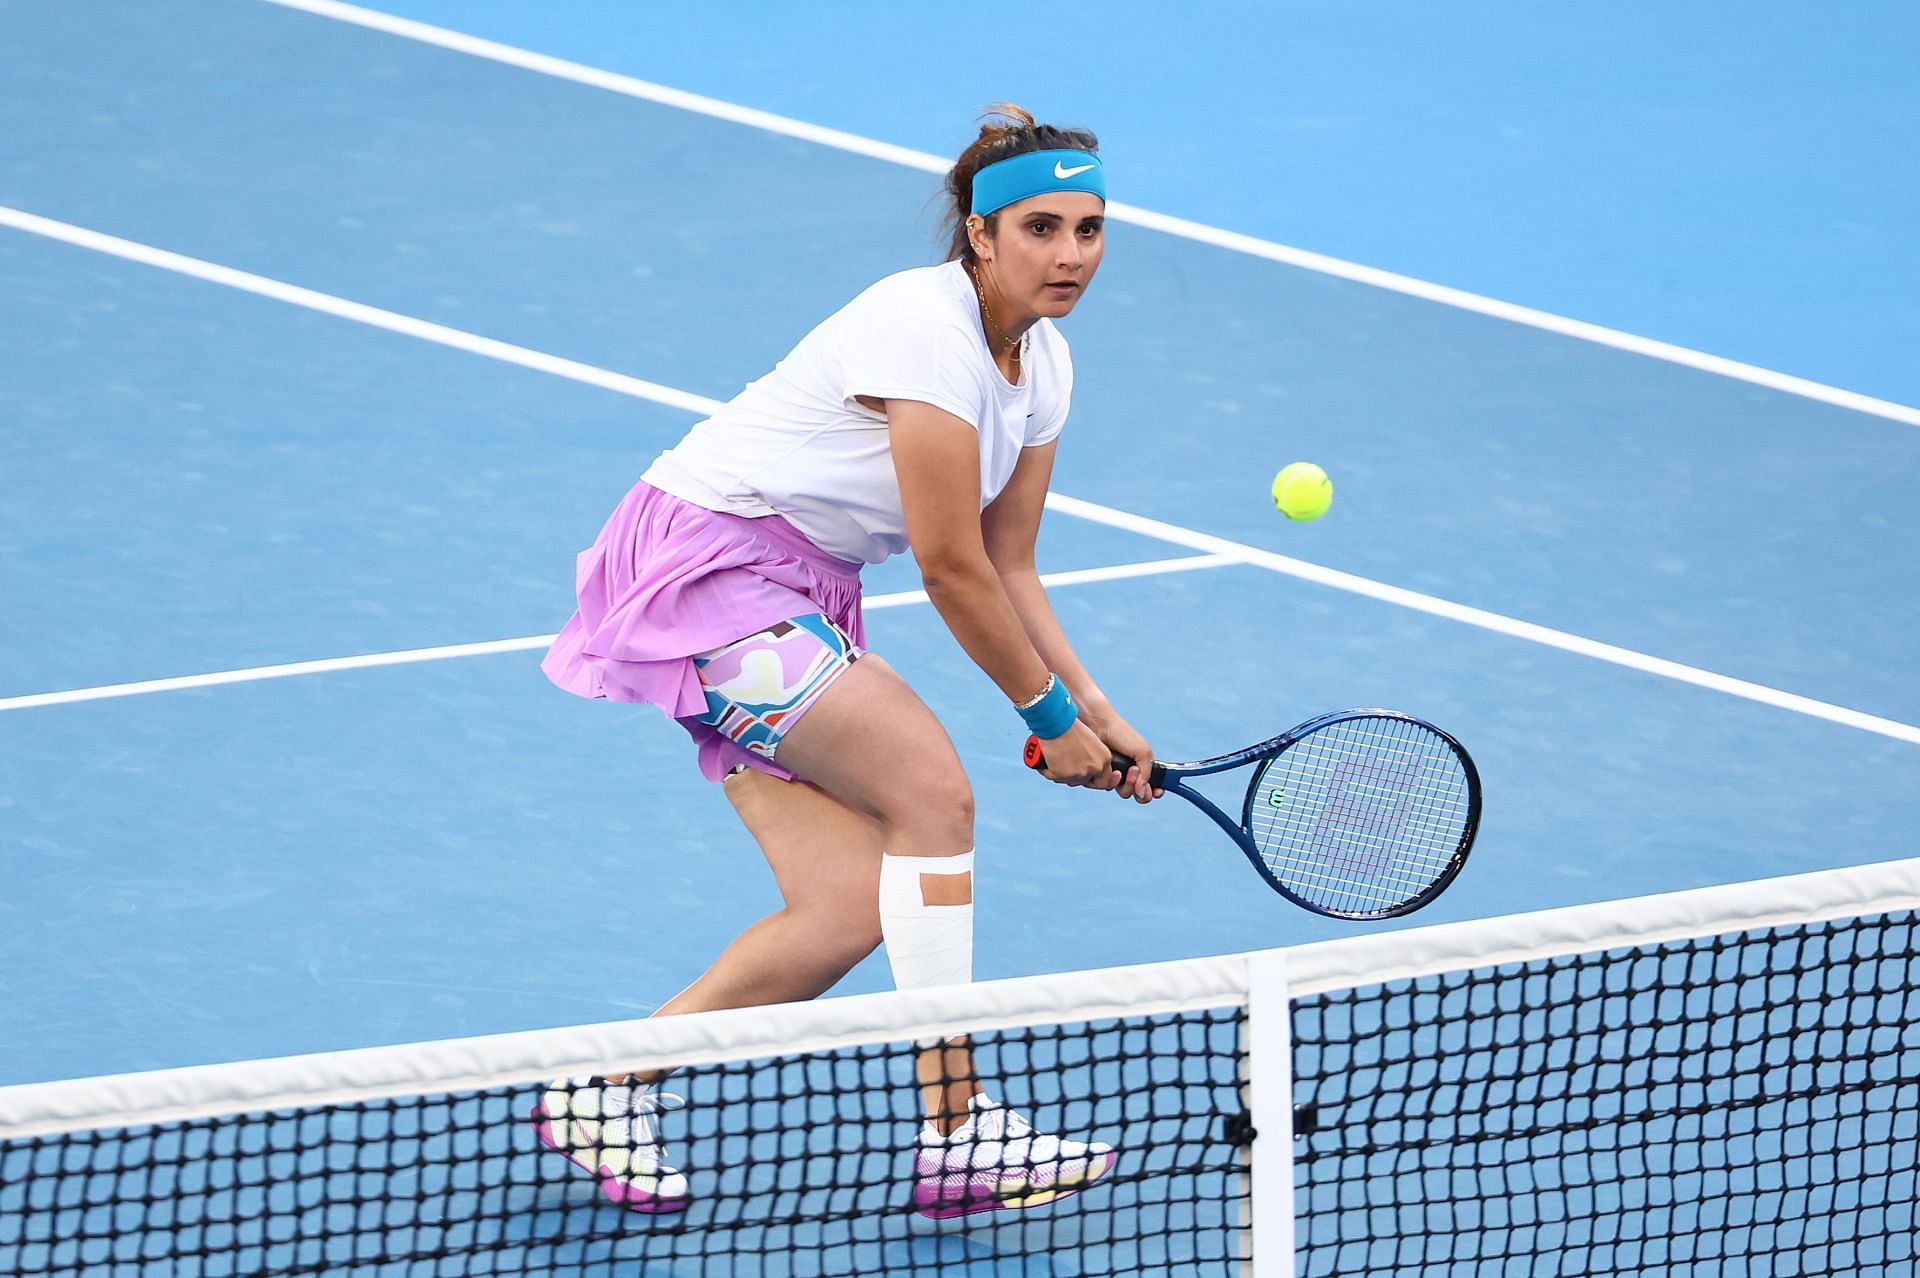 The Indian tennis player in action at the 2023 Australian Open